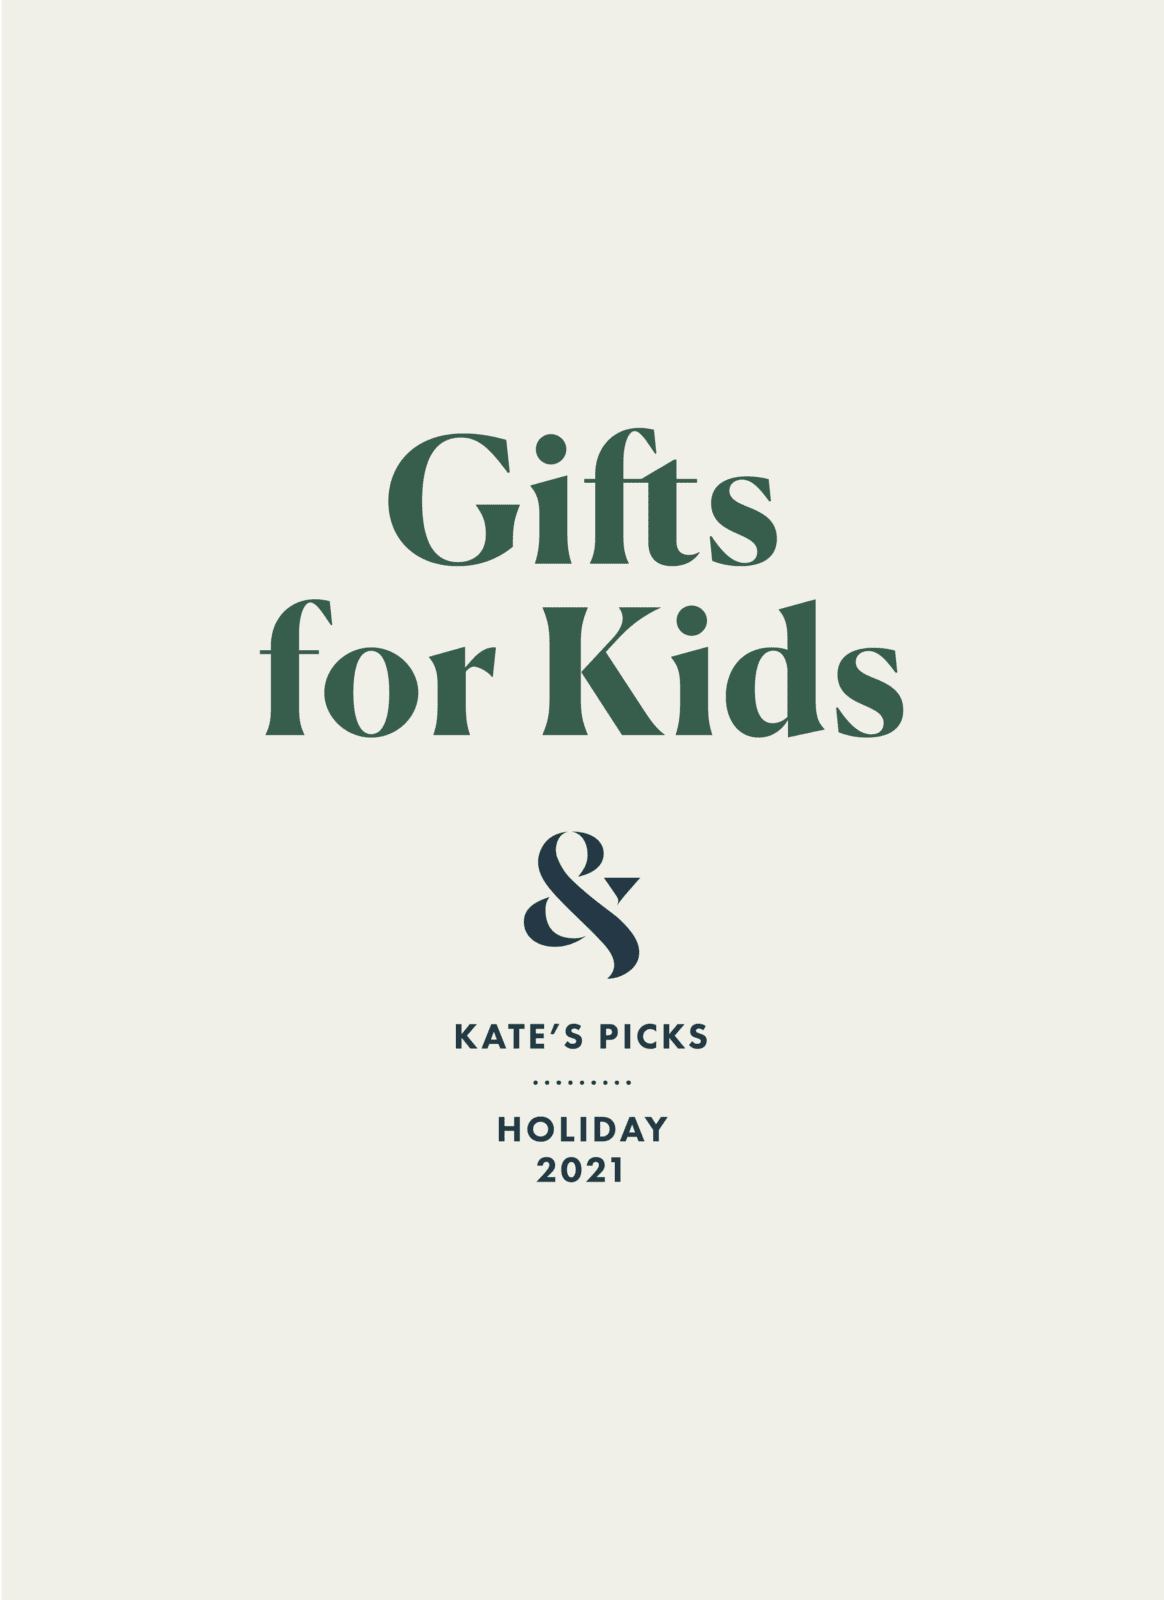 2021 Holiday Gift Guide: 12 Gifts for Kids | Wit & Delight